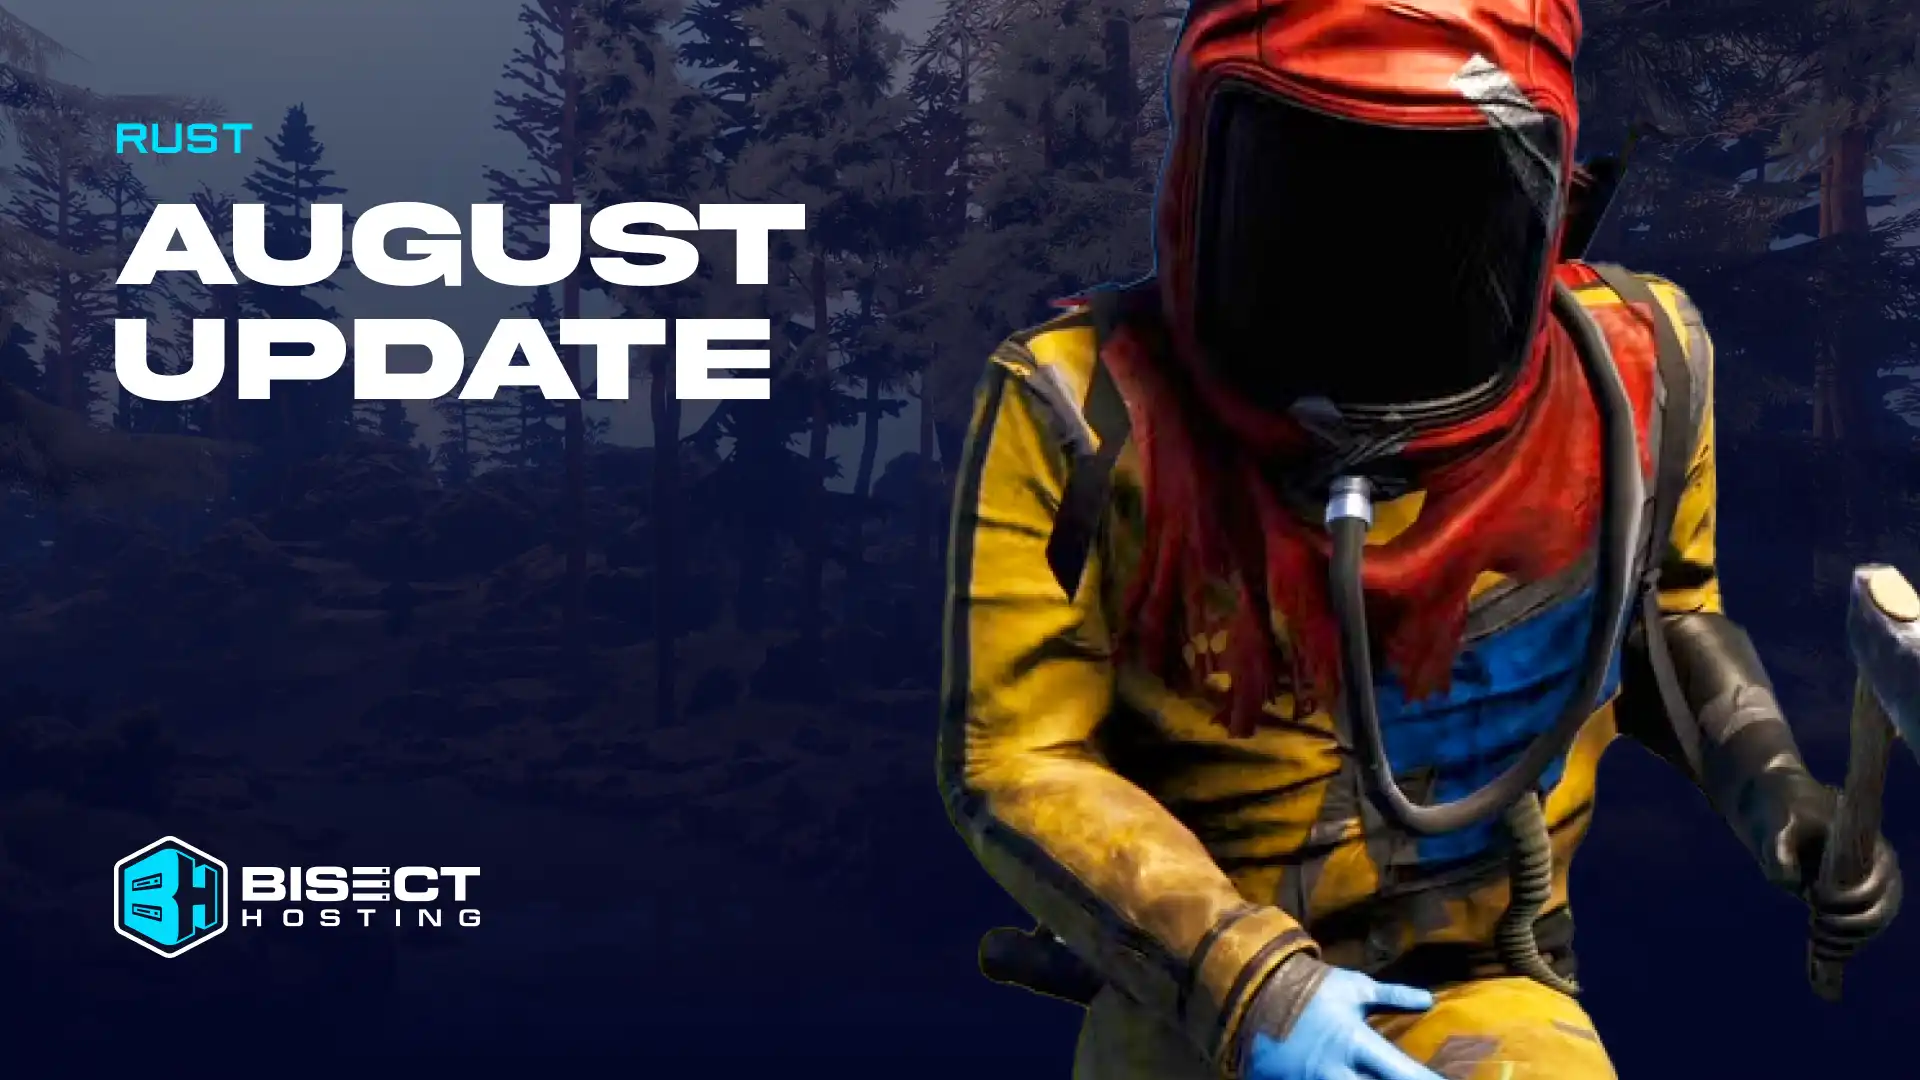 Rust August Update: Patch Notes & New Features Explained